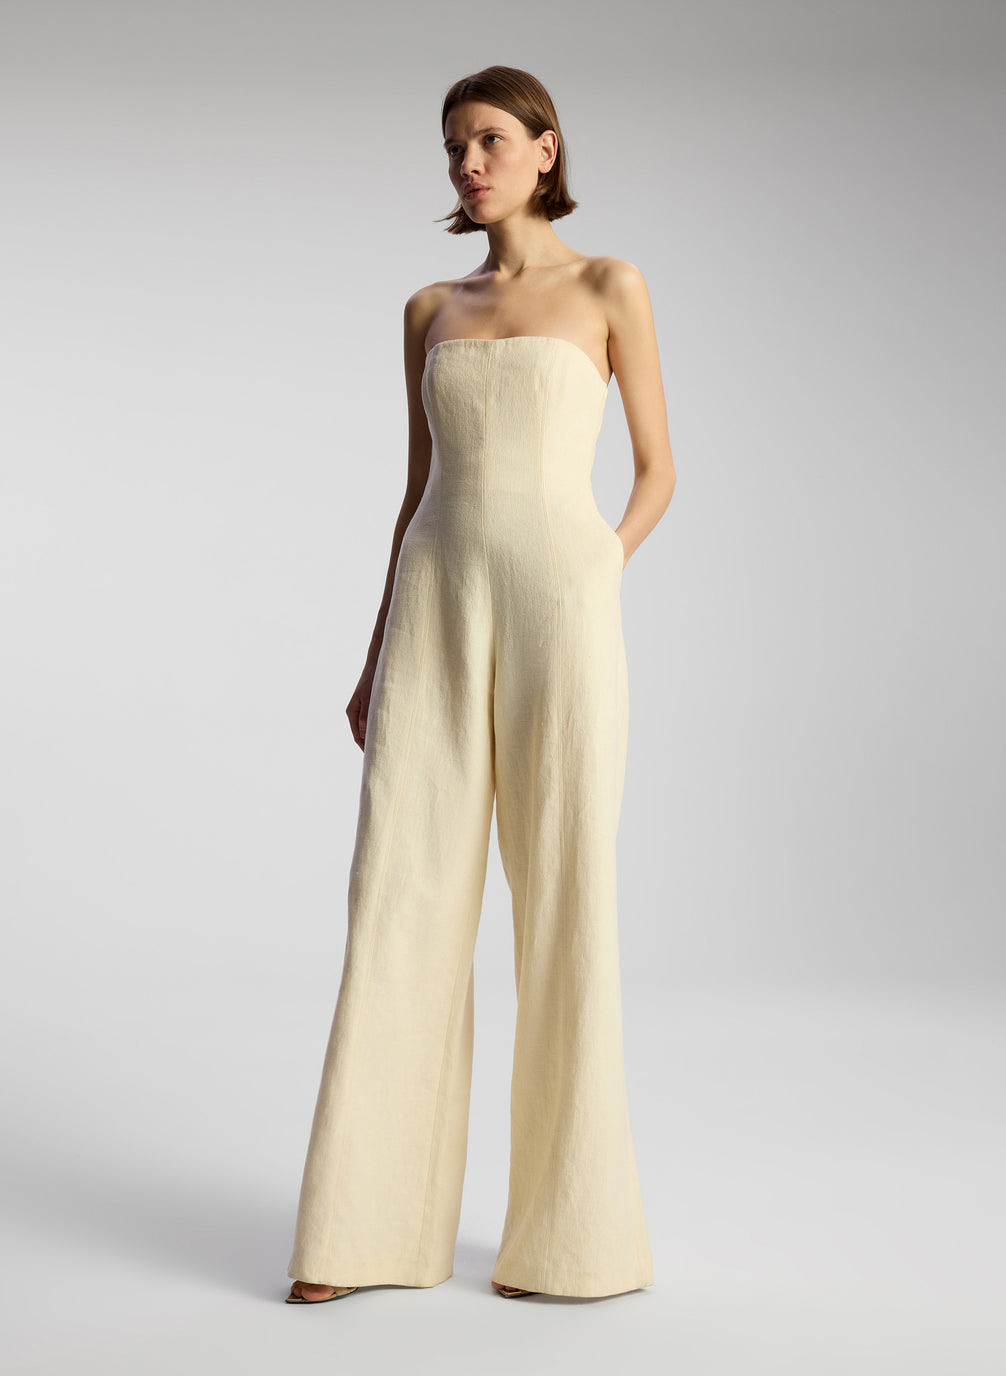 side view of woman wearing cream strapless jumpsuit